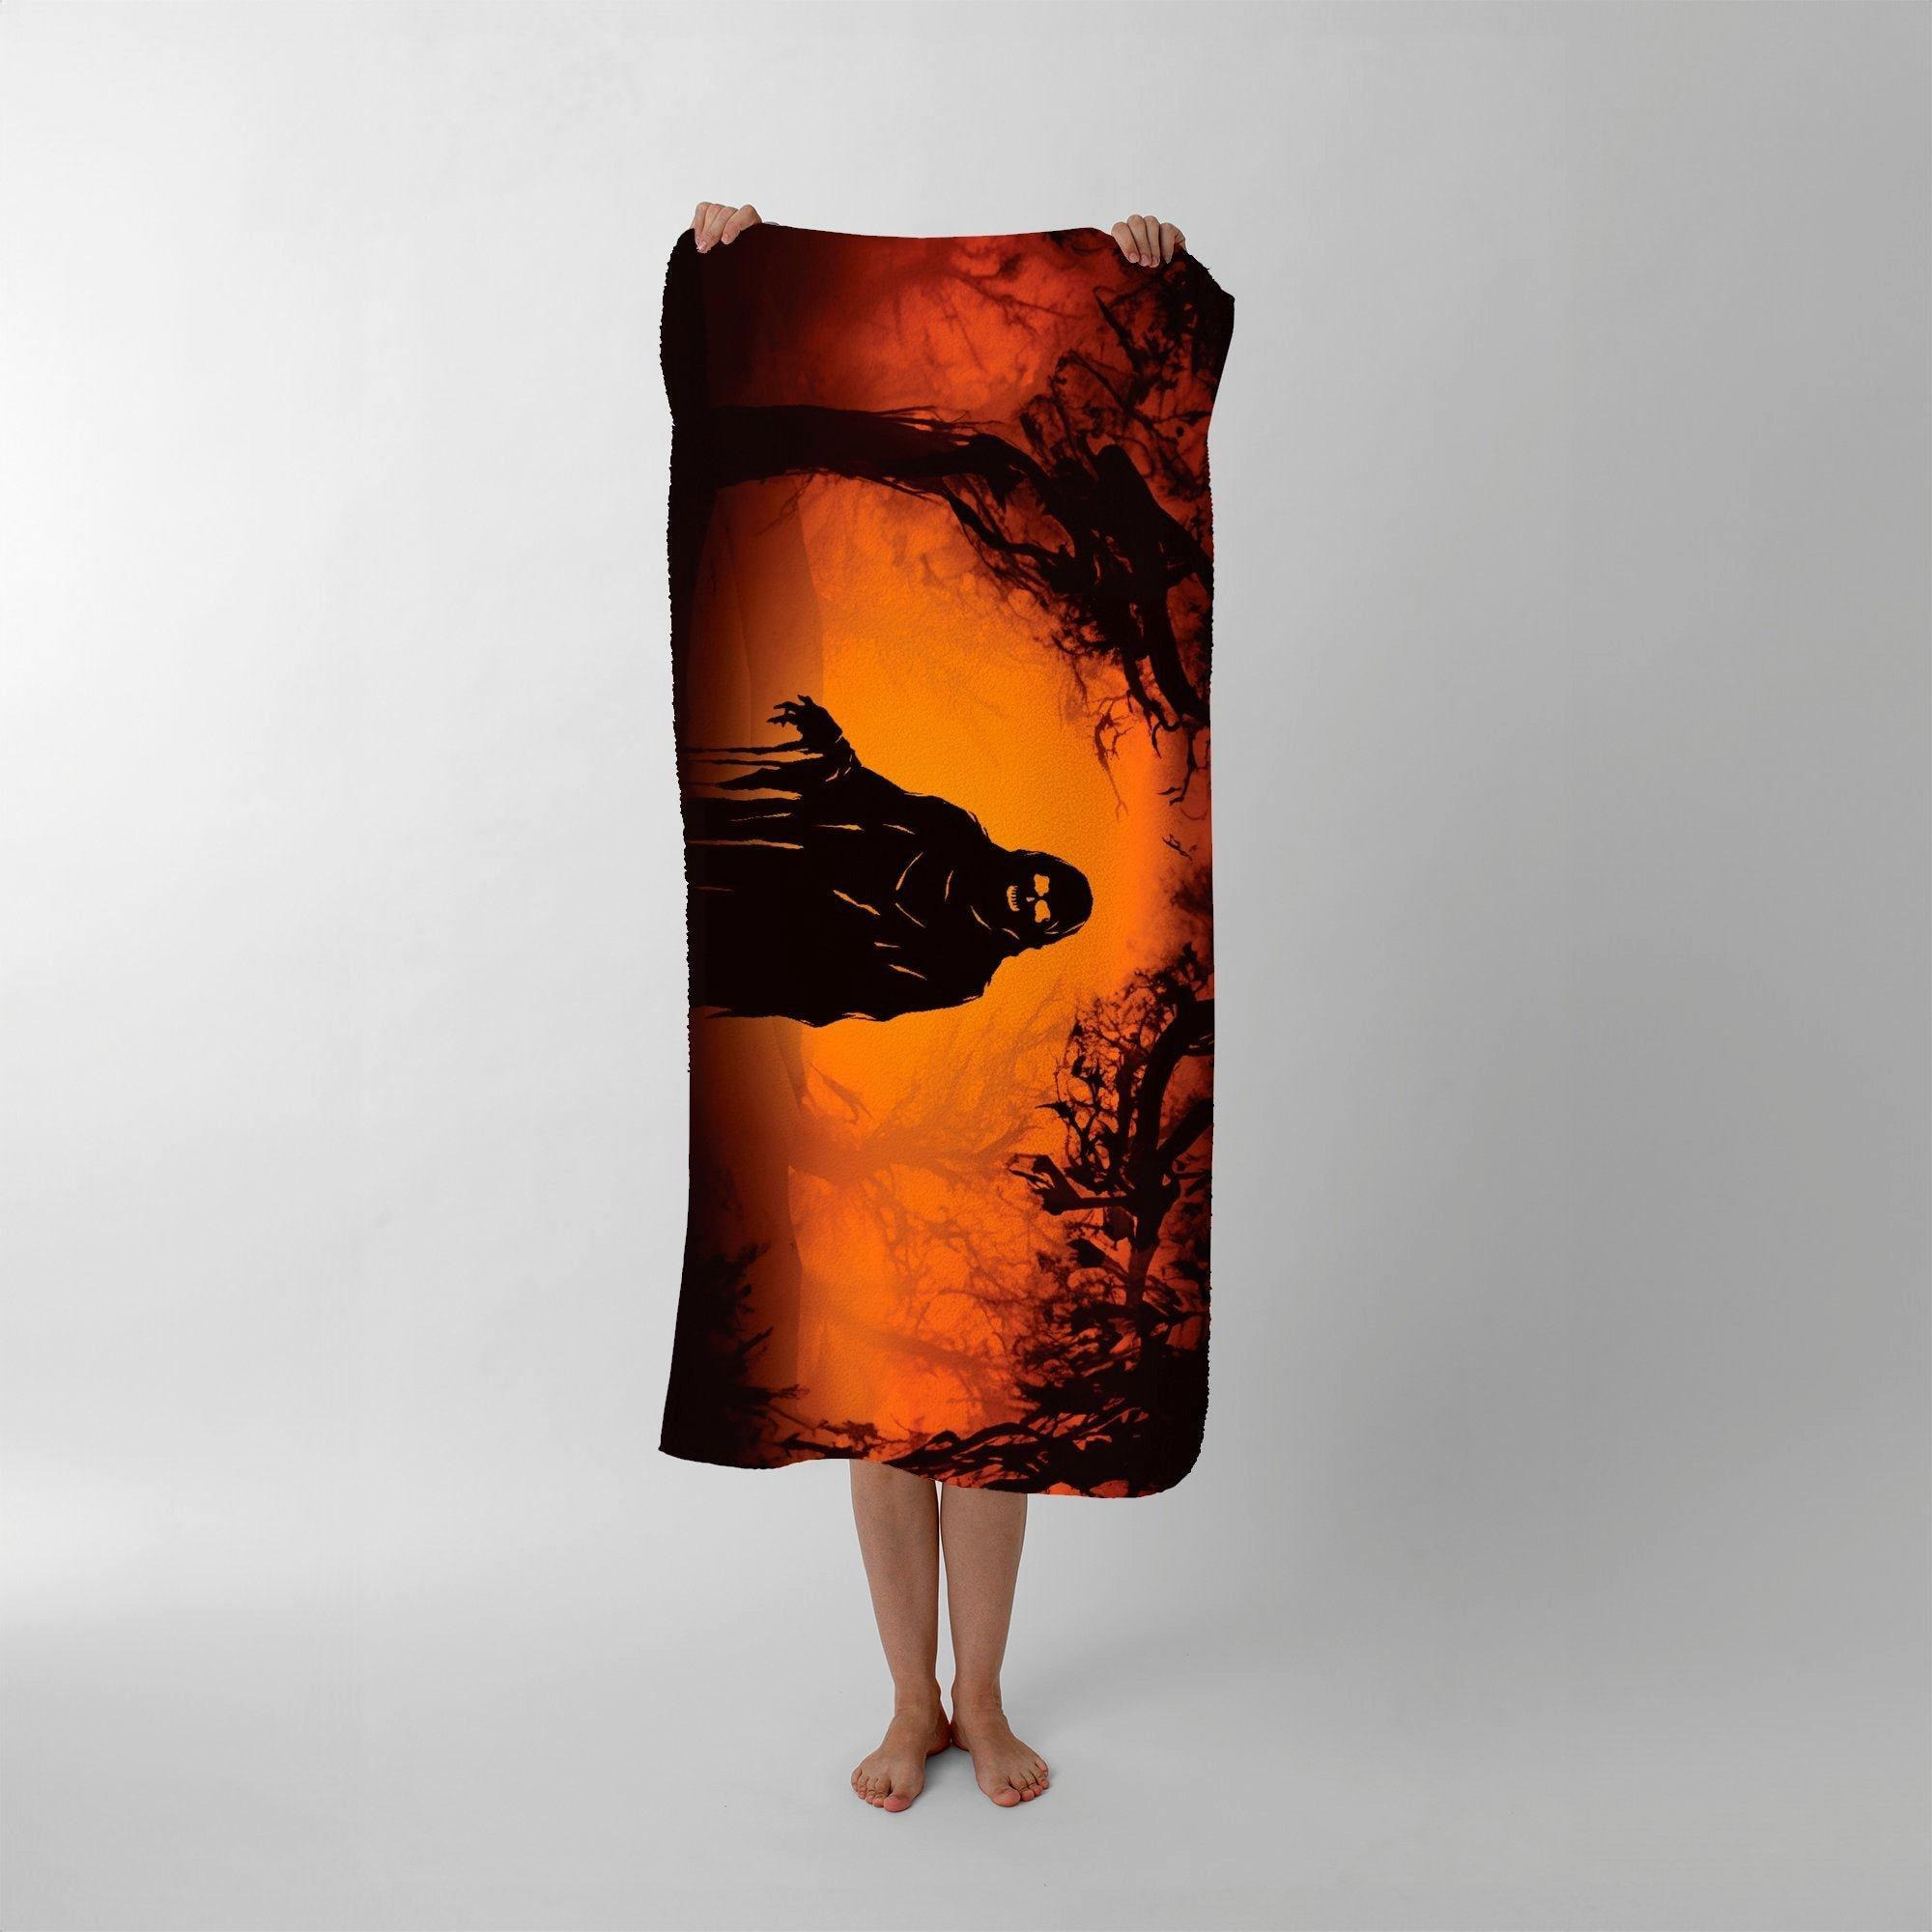 A Spooky Black And Orange Ghost Beach Towel - image 1